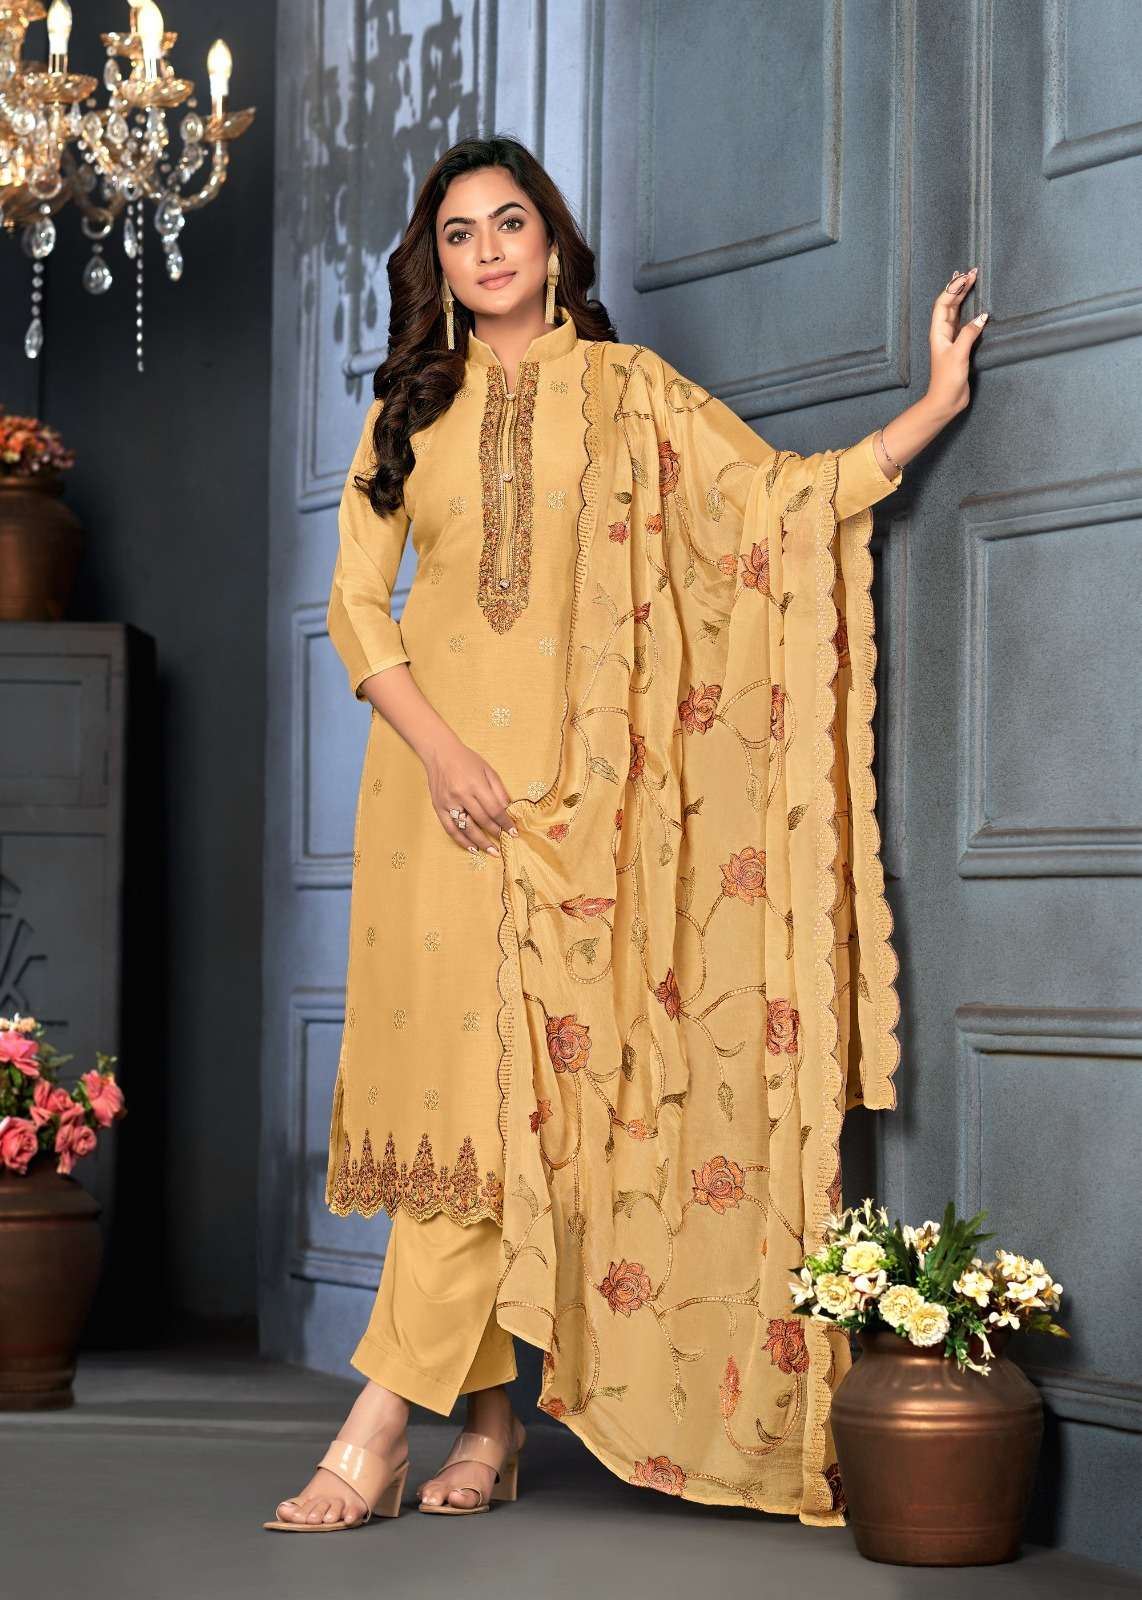 Nawaazish Vol-2 By Bela Fashion 3879 To 3885 Series Beautiful Festive Suits Colorful Stylish Fancy Casual Wear & Ethnic Wear Cotton Silk Embroidered Dresses At Wholesale Price